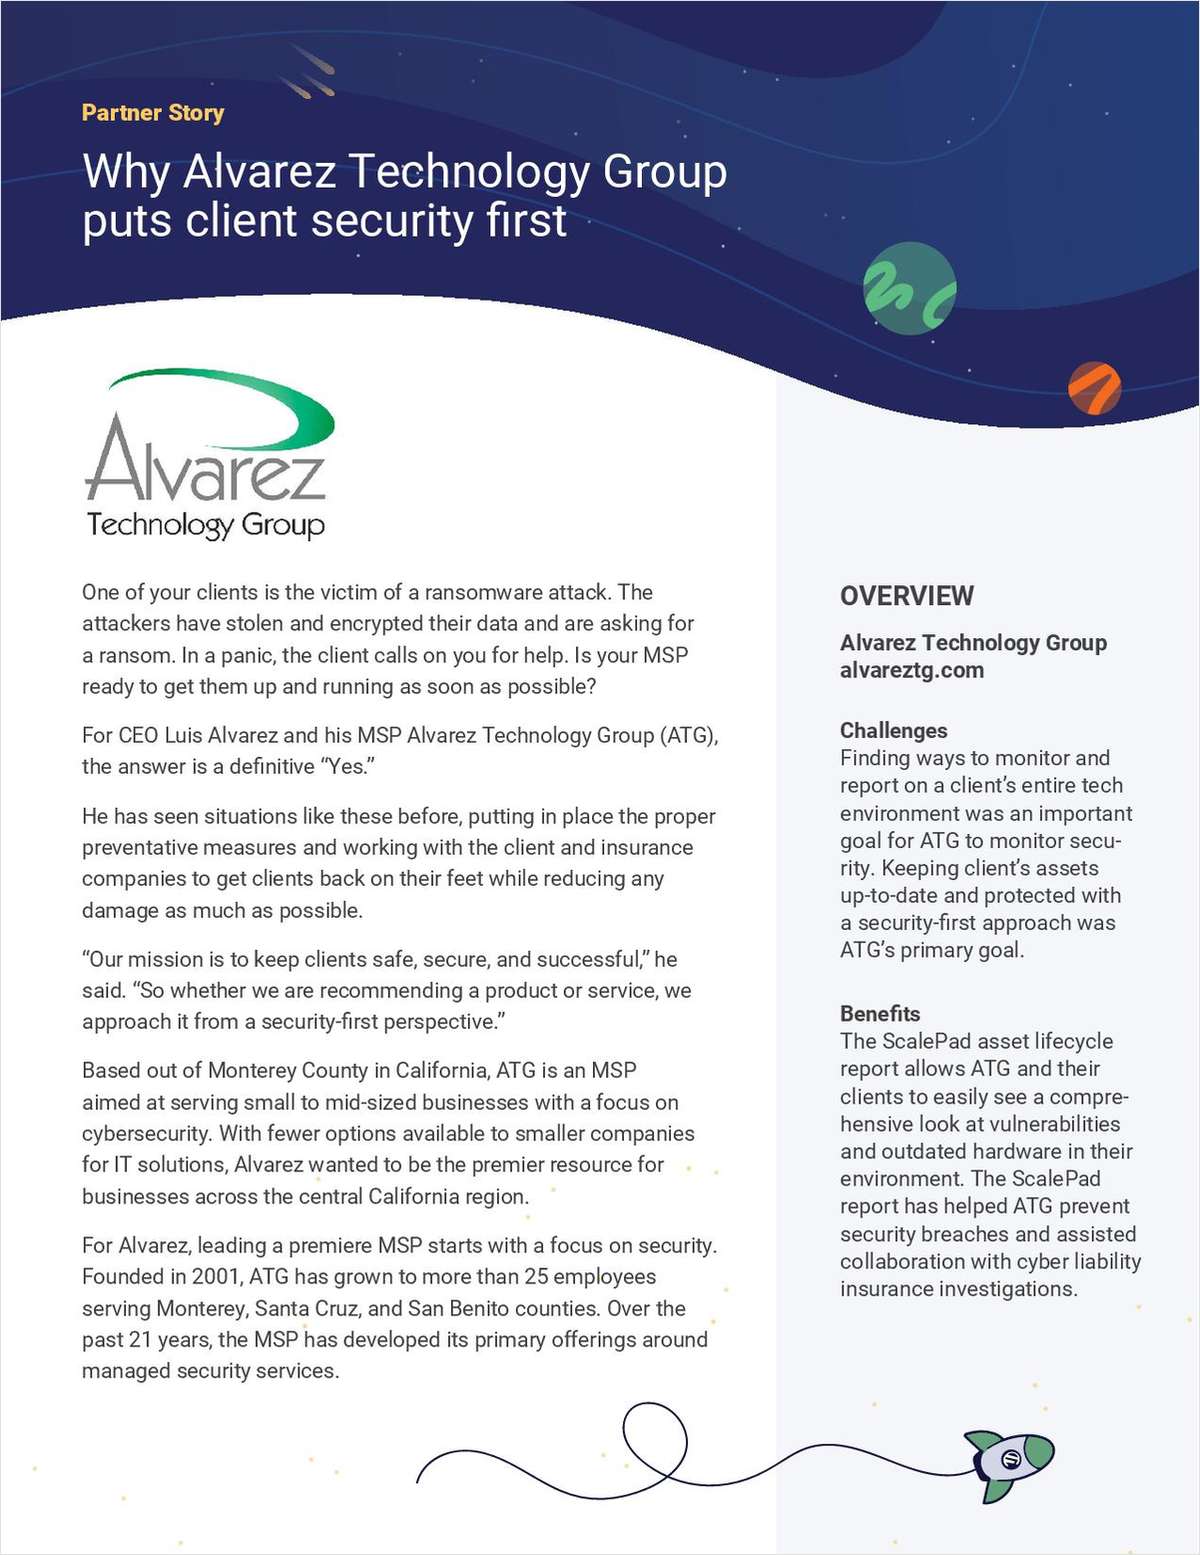 Why Alvarez Technology Group puts client security first